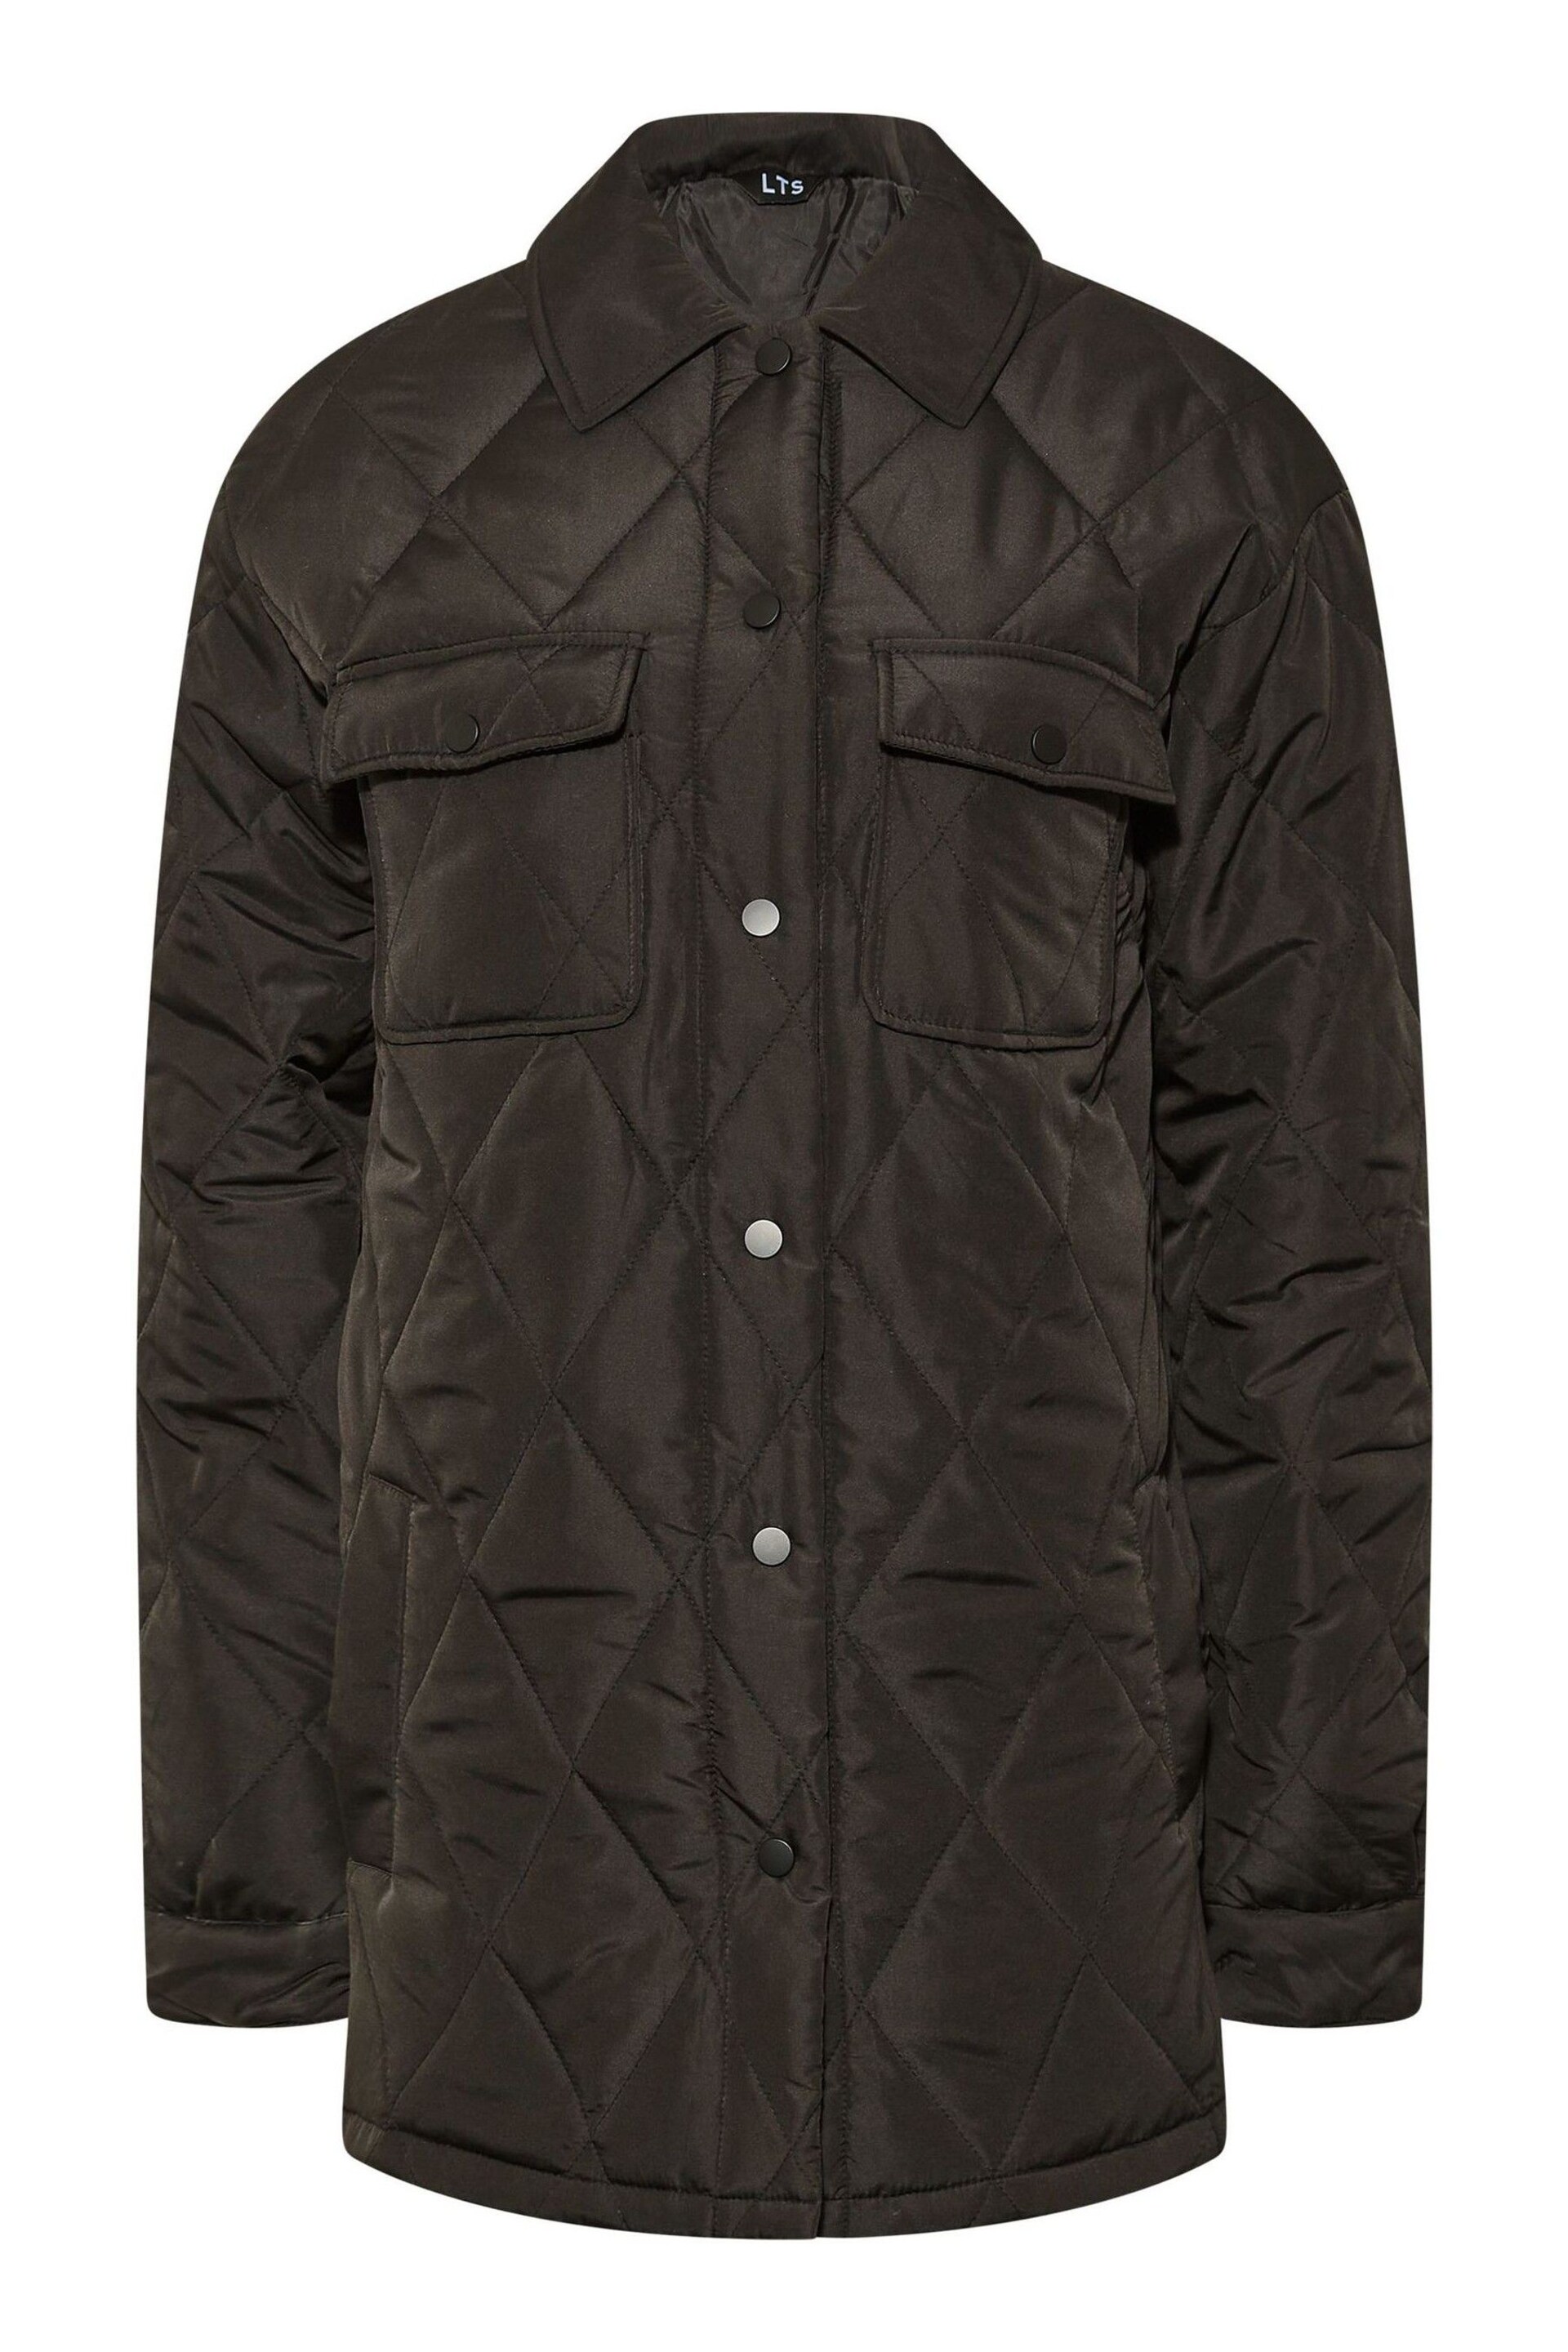 Long Tall Sally Black Lightweight Diamond Quilted Shacket - Image 4 of 5